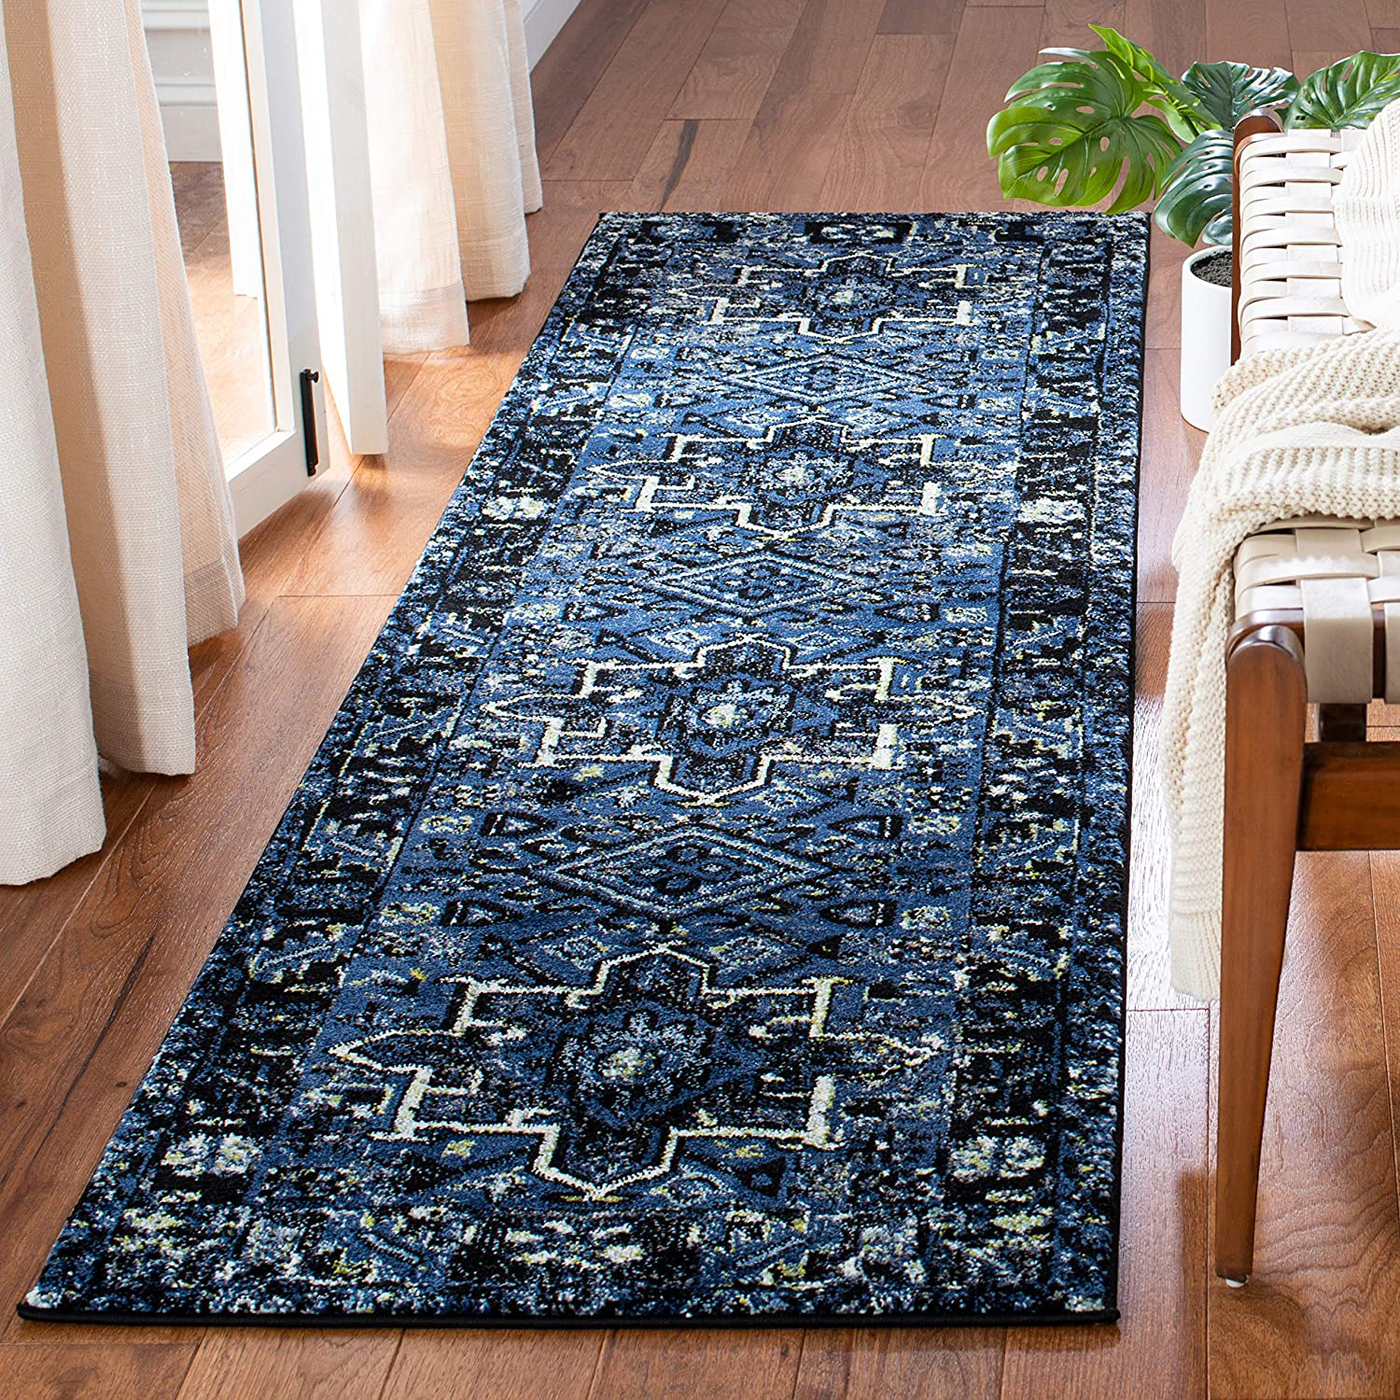 Safavieh Vintage Hamadan Collection VTH211N Oriental Traditional Persian Non-Shedding Stain Resistant Living Room Bedroom Runner, 2'3" x 8' , Blue / Grey